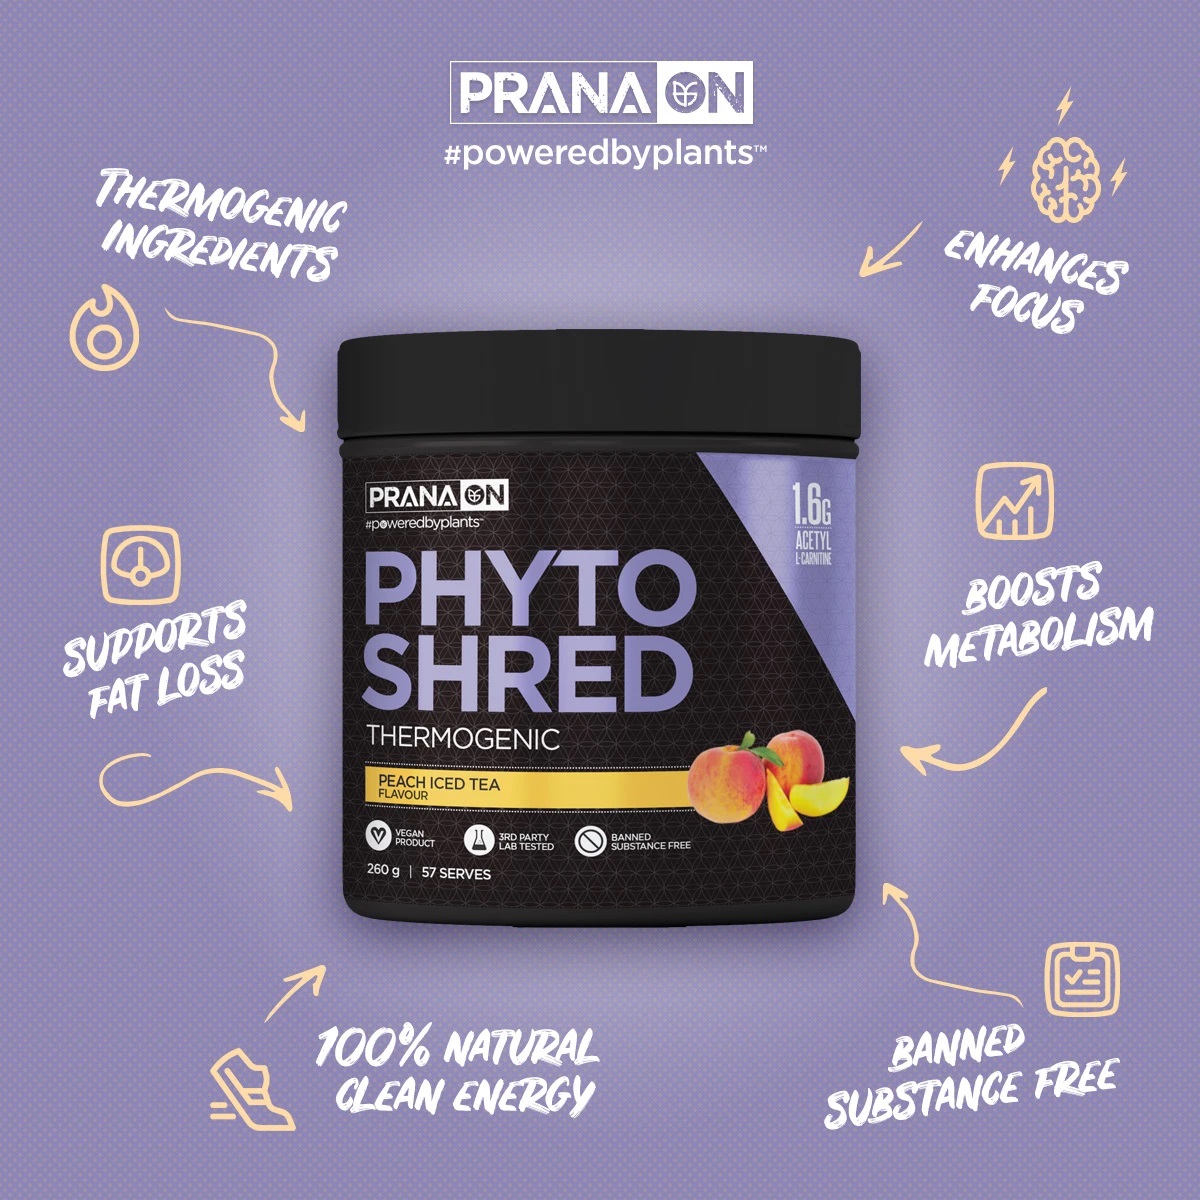 Phyto Shred Product Image